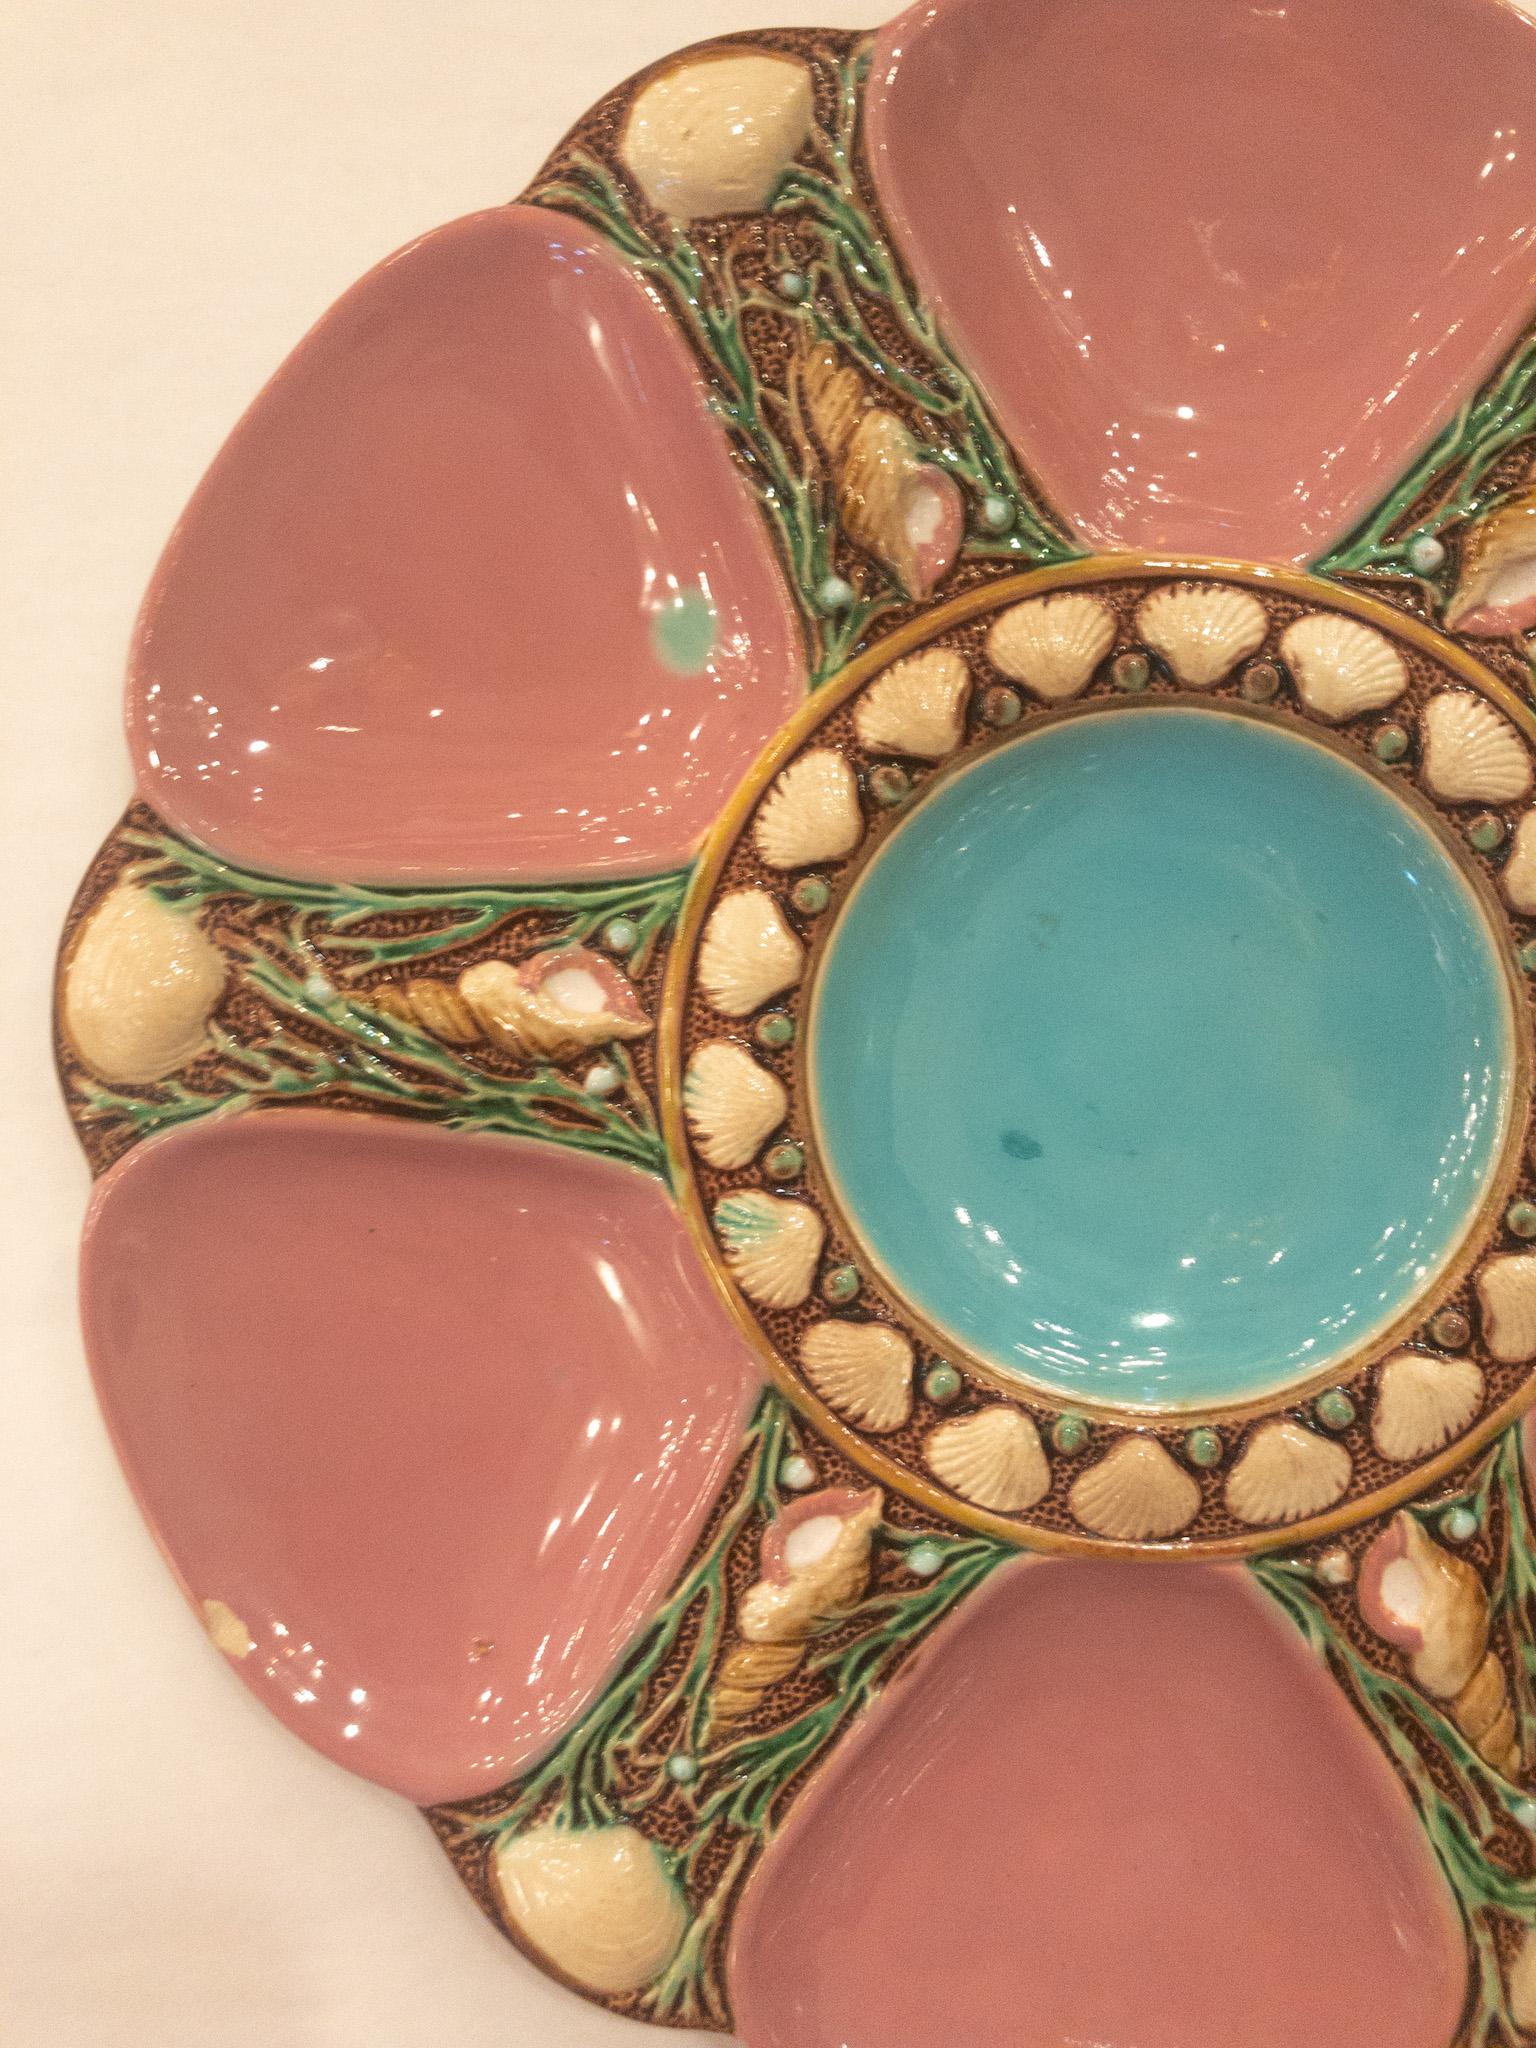 Rare English Minton Majolica oyster plate circa 1875 with pink and blue glaze.